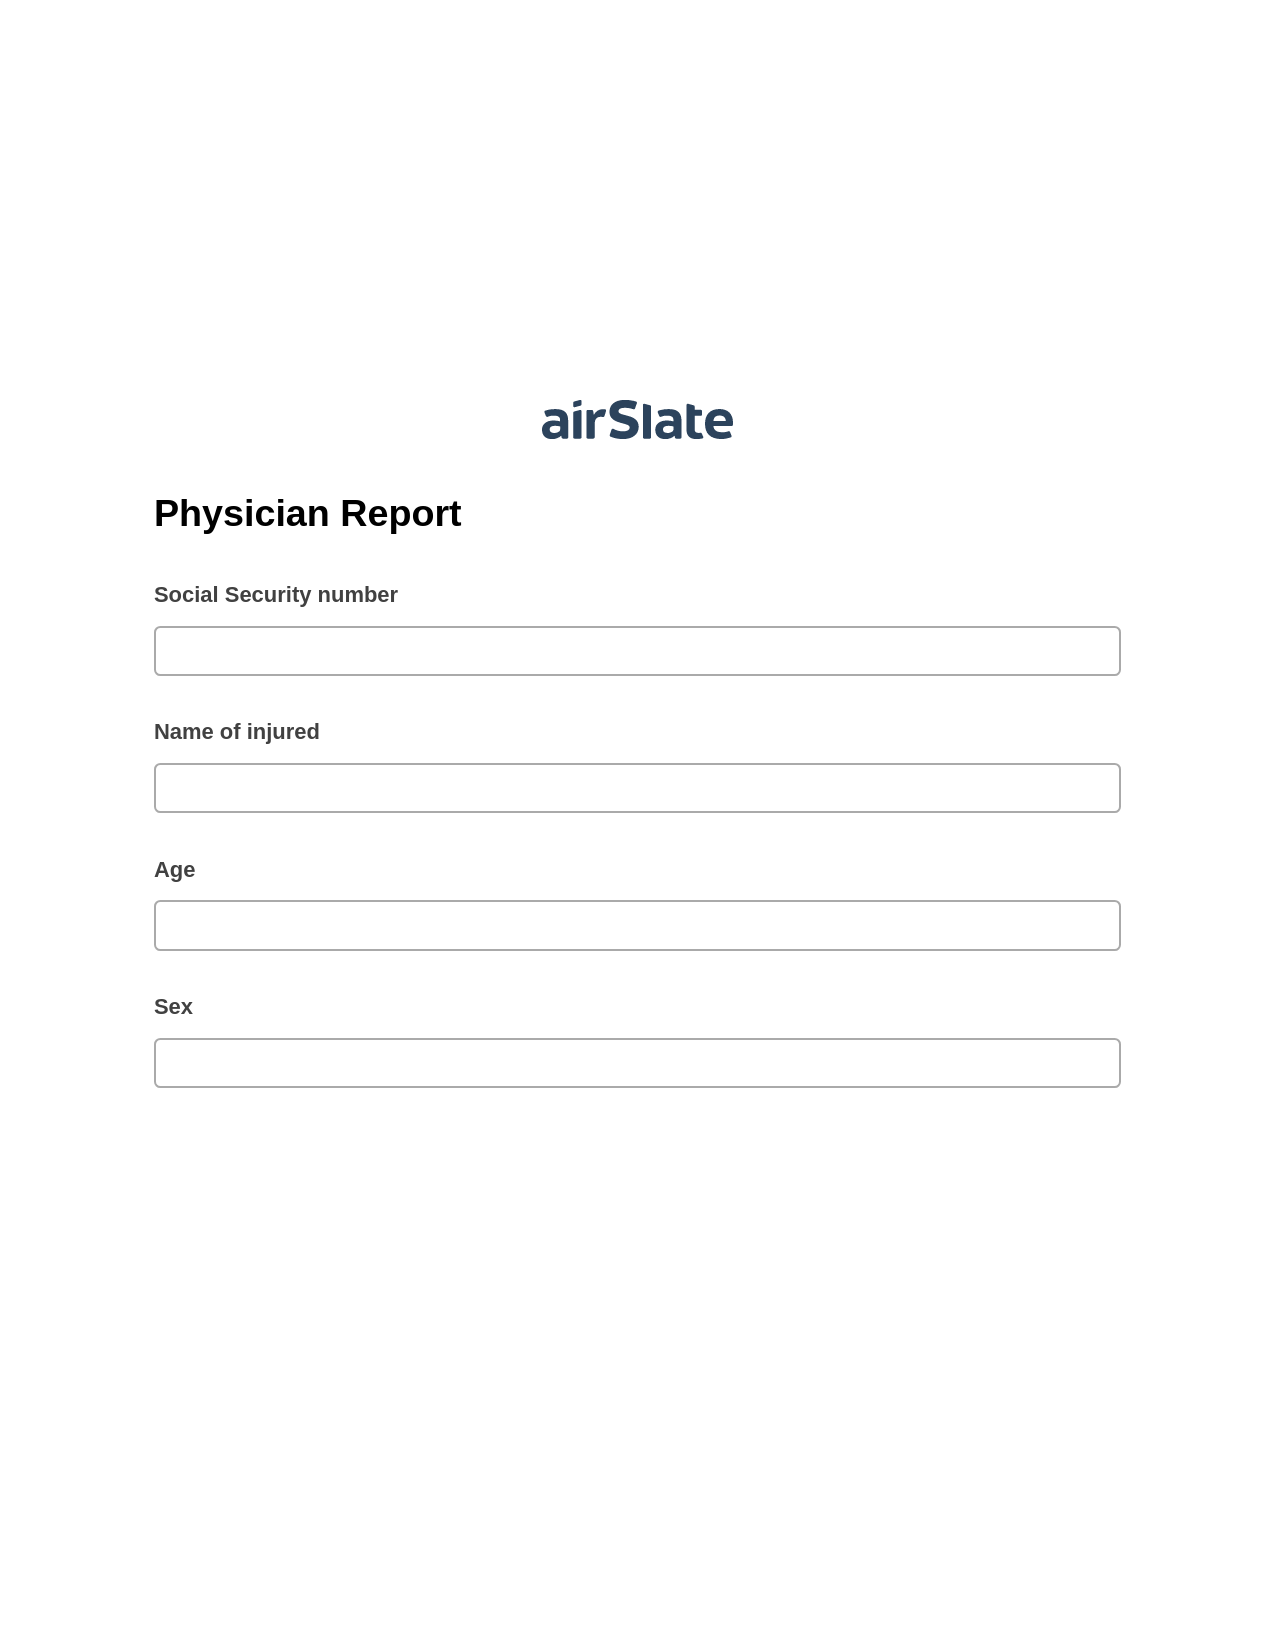 Physician Report Pre-fill Document Bot, Create MS Dynamics 365 Records Bot, Webhook Postfinish Bot